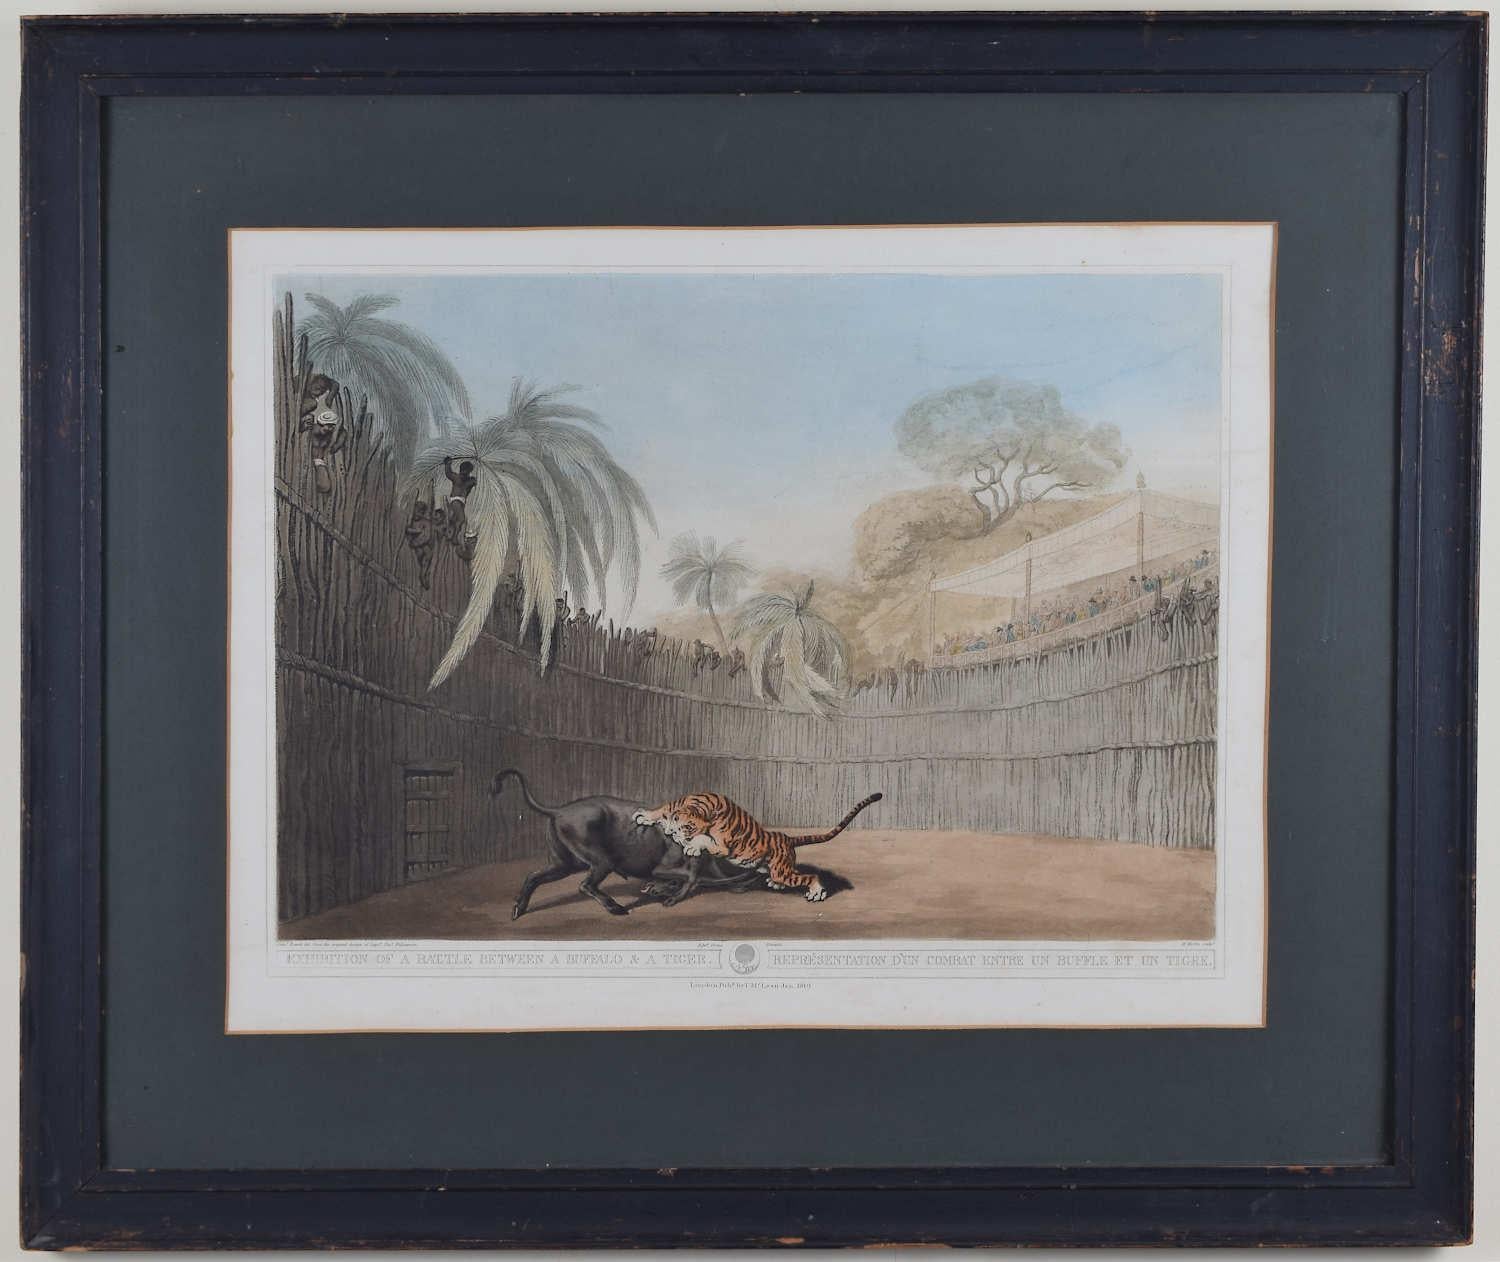 Samuel Howitt: 'Battle between Buffalo and Tiger' print after Thomas Williamson For Sale 1